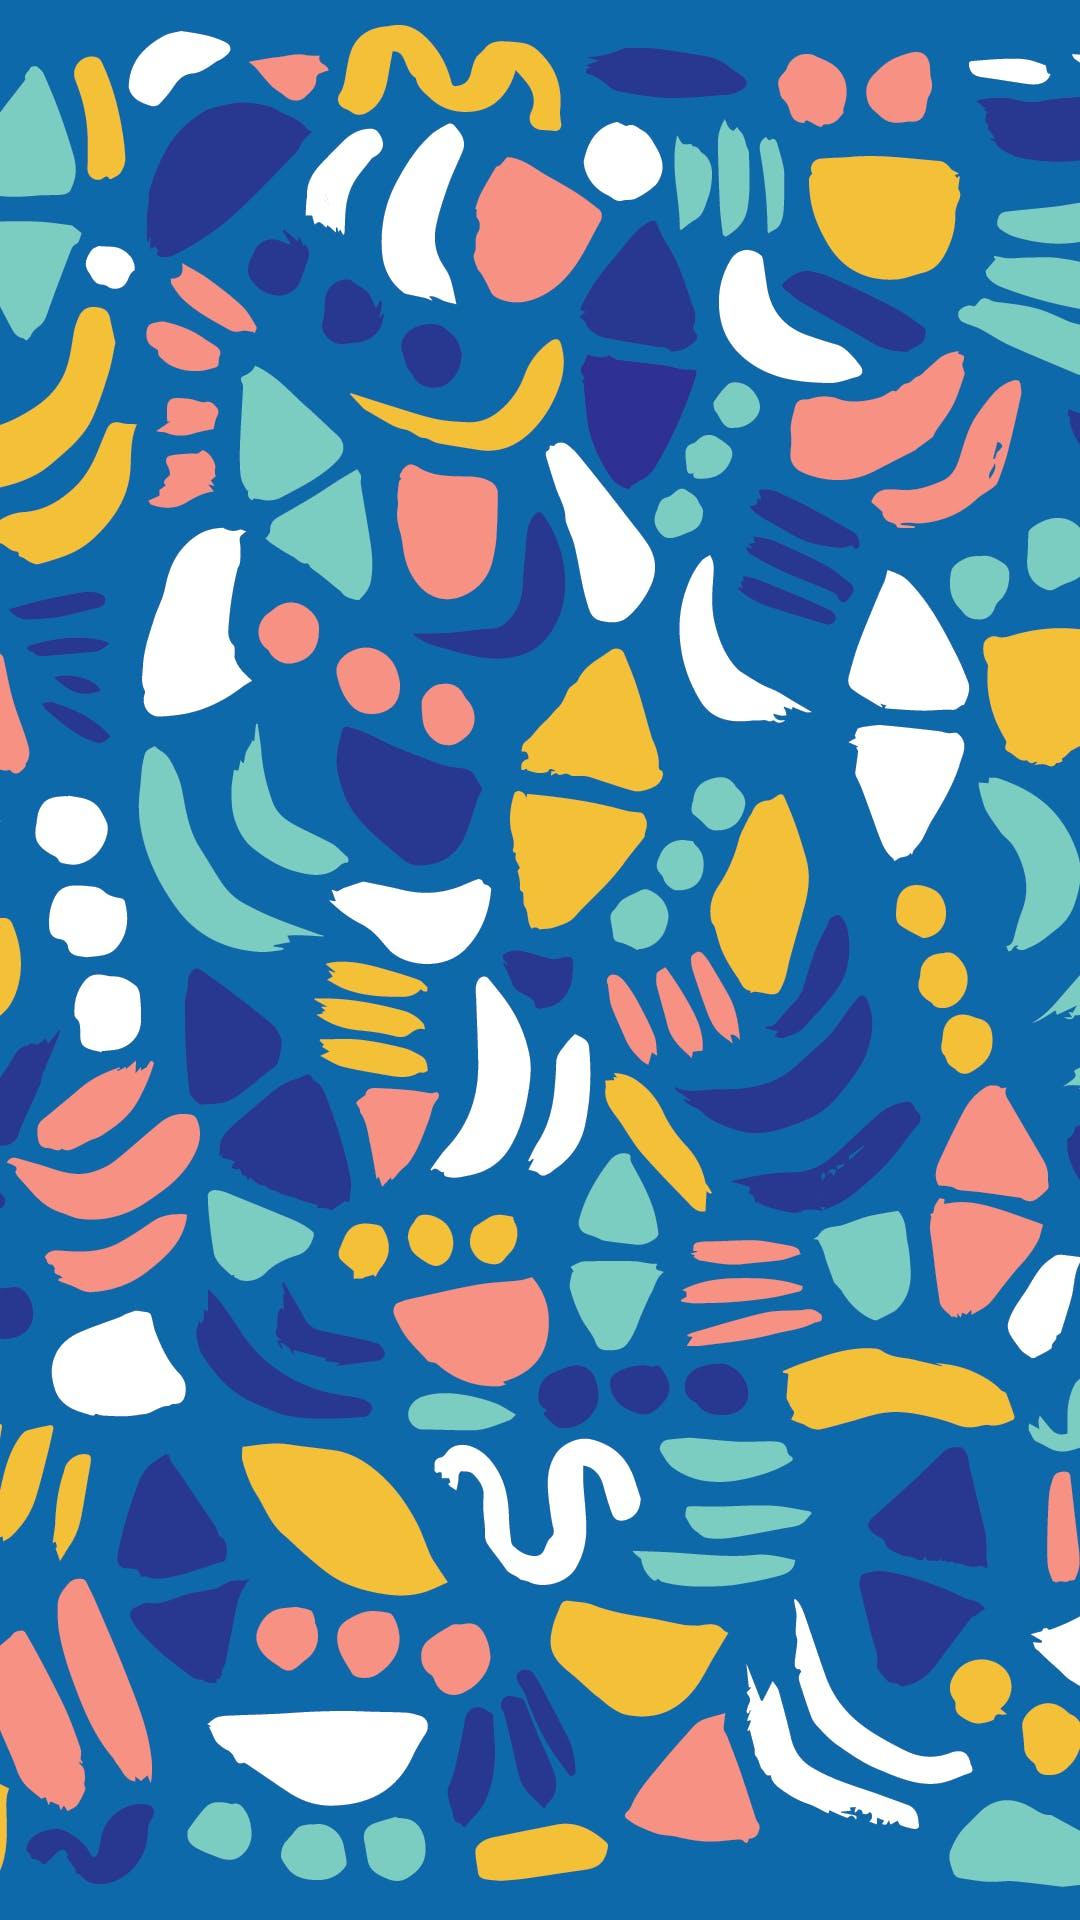 Mobile Wallpaper Downloads for People Obsessed with Patterns